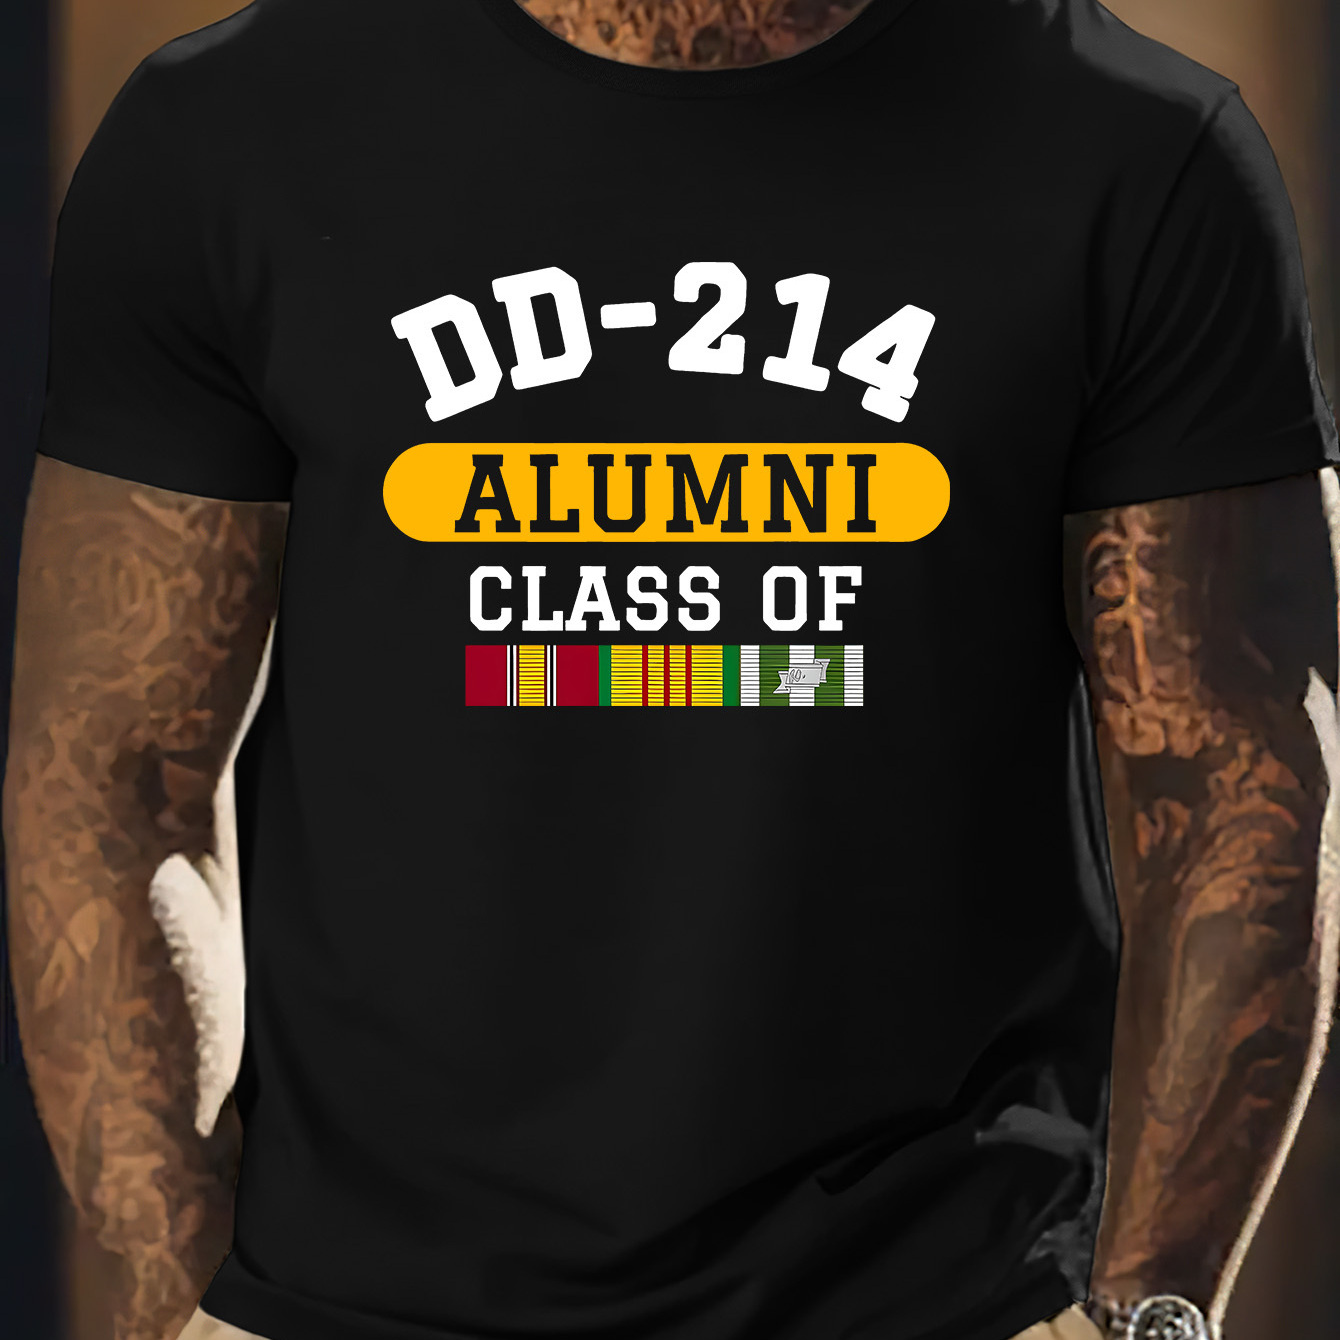 

Men's Casual Novelty T-shirt, " Dd-214 Alumni" Letter Print Short Sleeve Summer Top, Stylish Crew Neck Tee For Daily Wear